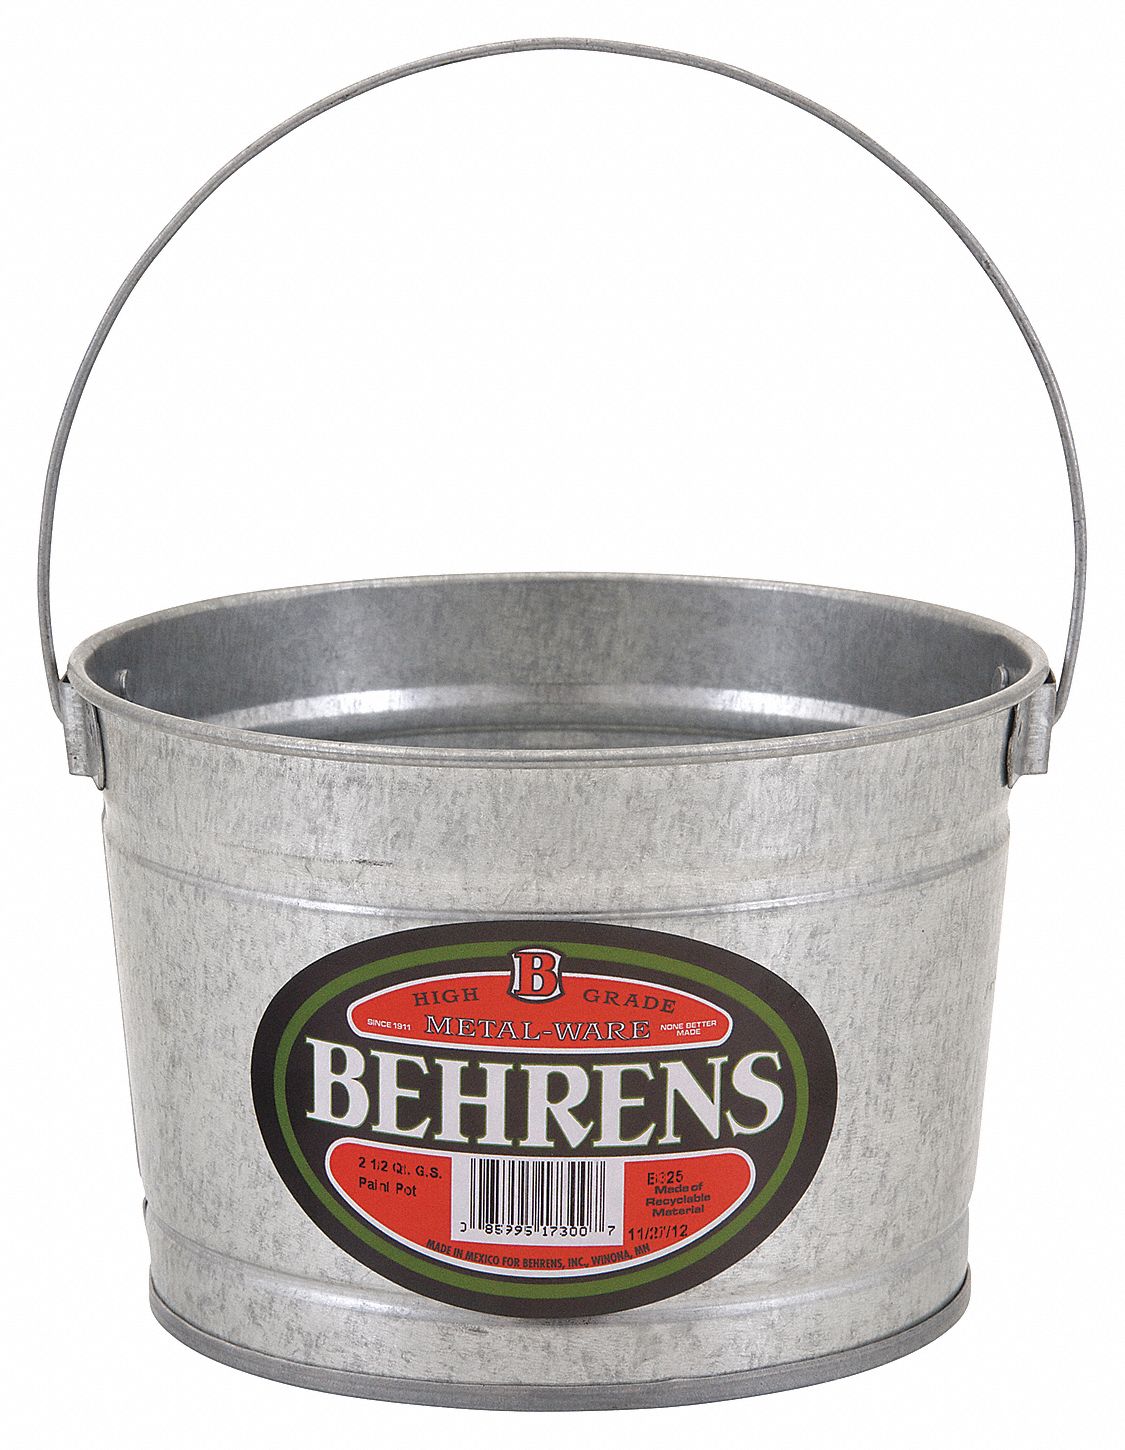 Bucket: 3/4 gal Capacity, 7 in Overall Wd, 5 in Overall Ht, Galvanized Steel, Graduated